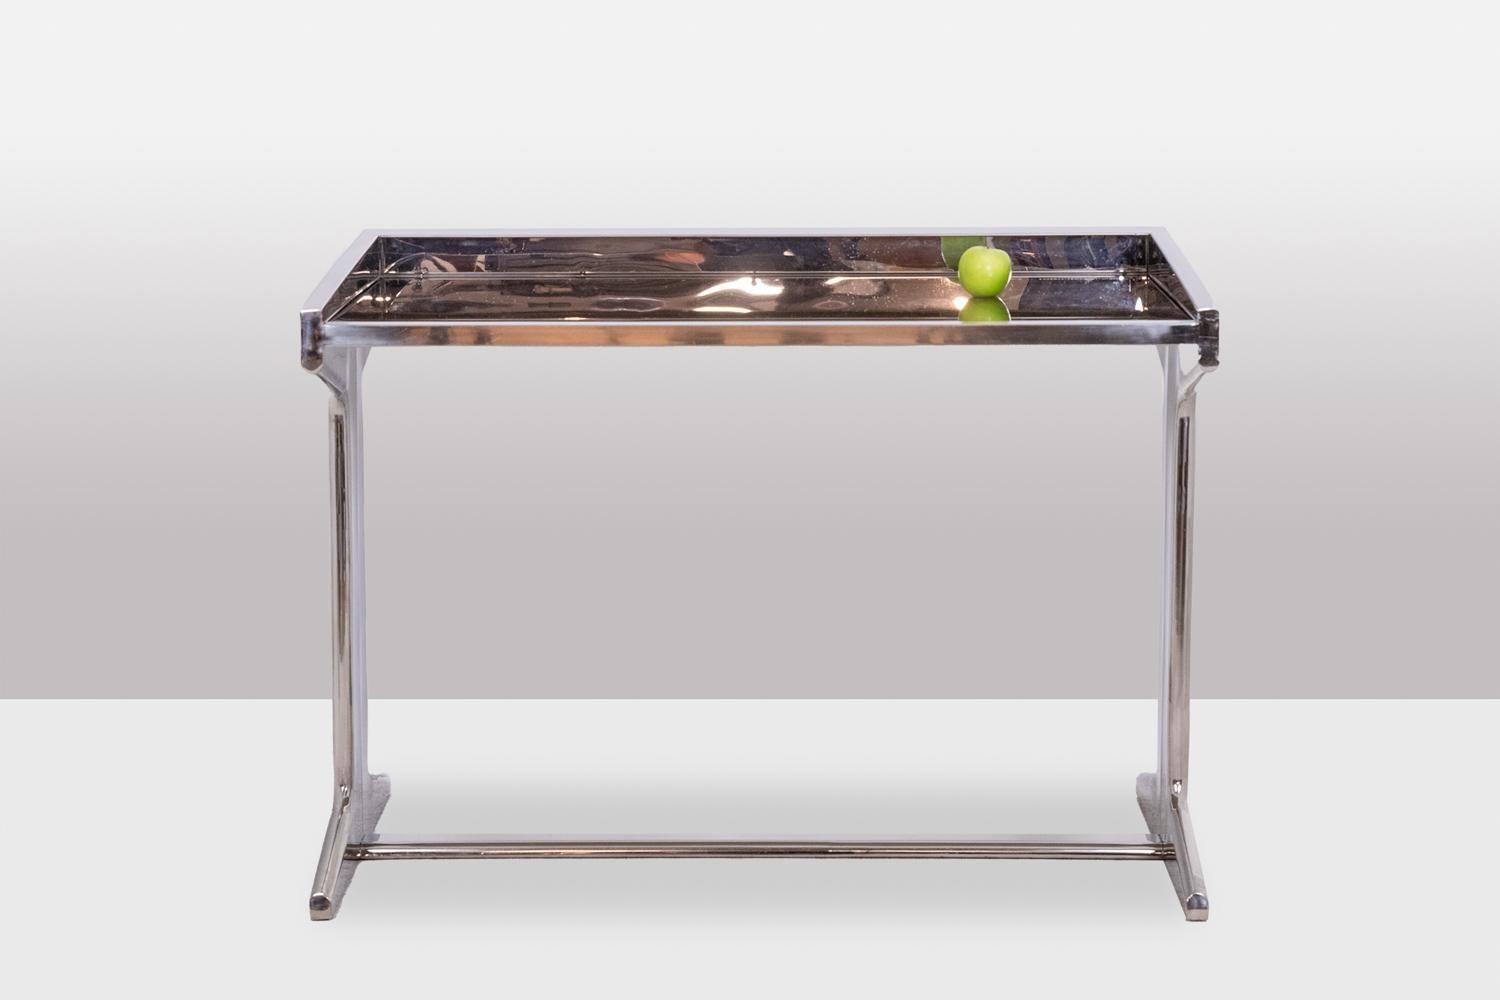 Polished metal desk, with its smoked glass top, rectangular and geometric in shape.

French work realized in the 1980s.

Dimensions: H 85 x W 120 x D 75 cm

Reference: LS5457638U